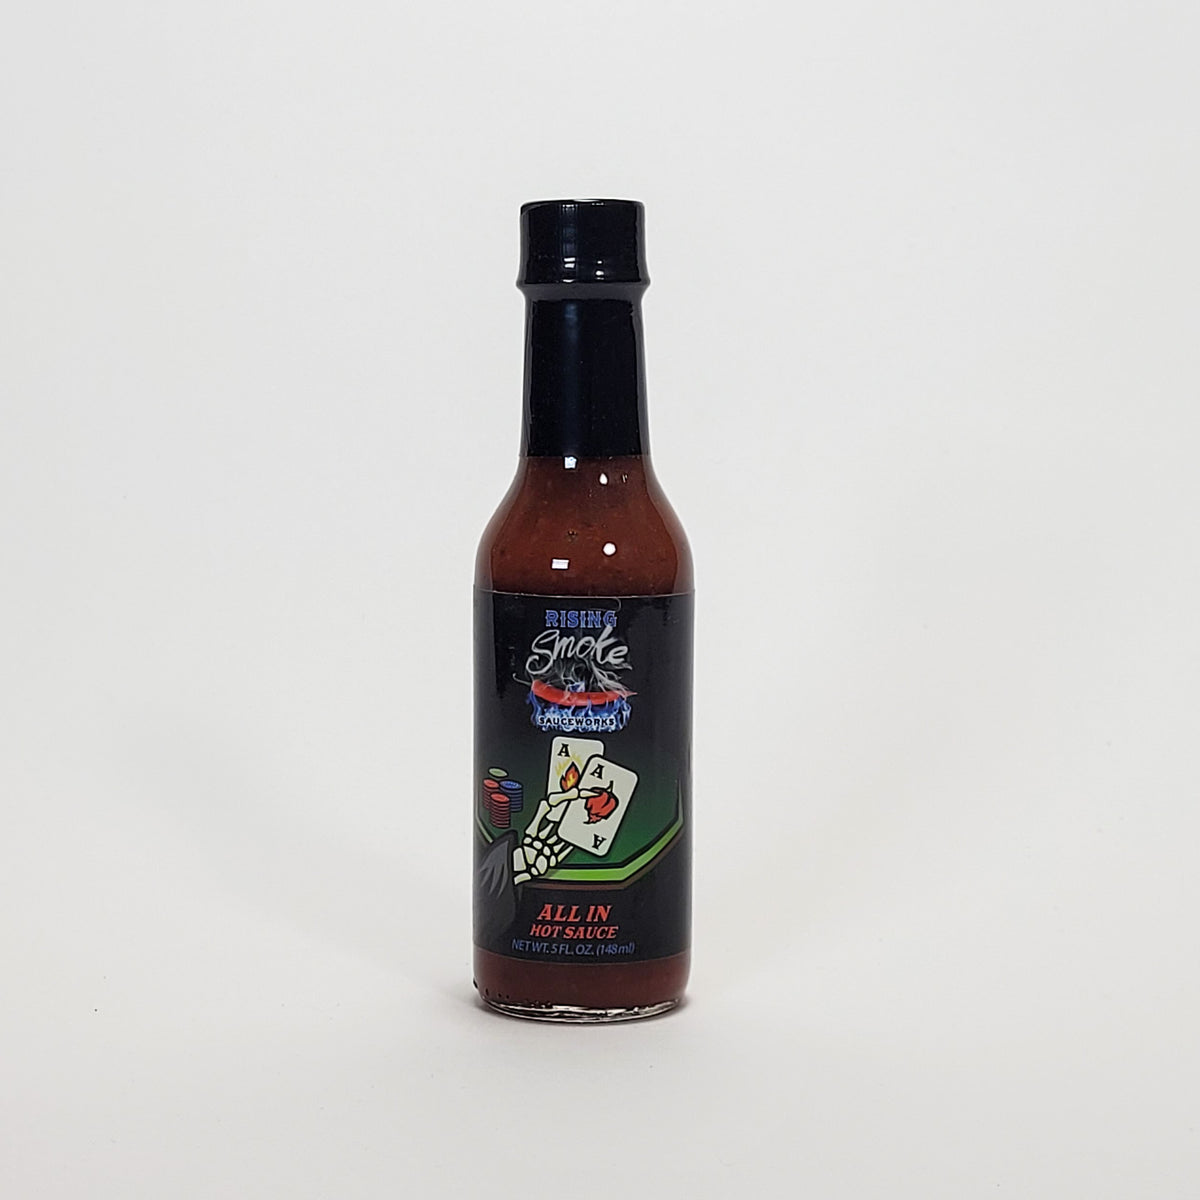 Rising Smoke Sauceworks All In hot sauce